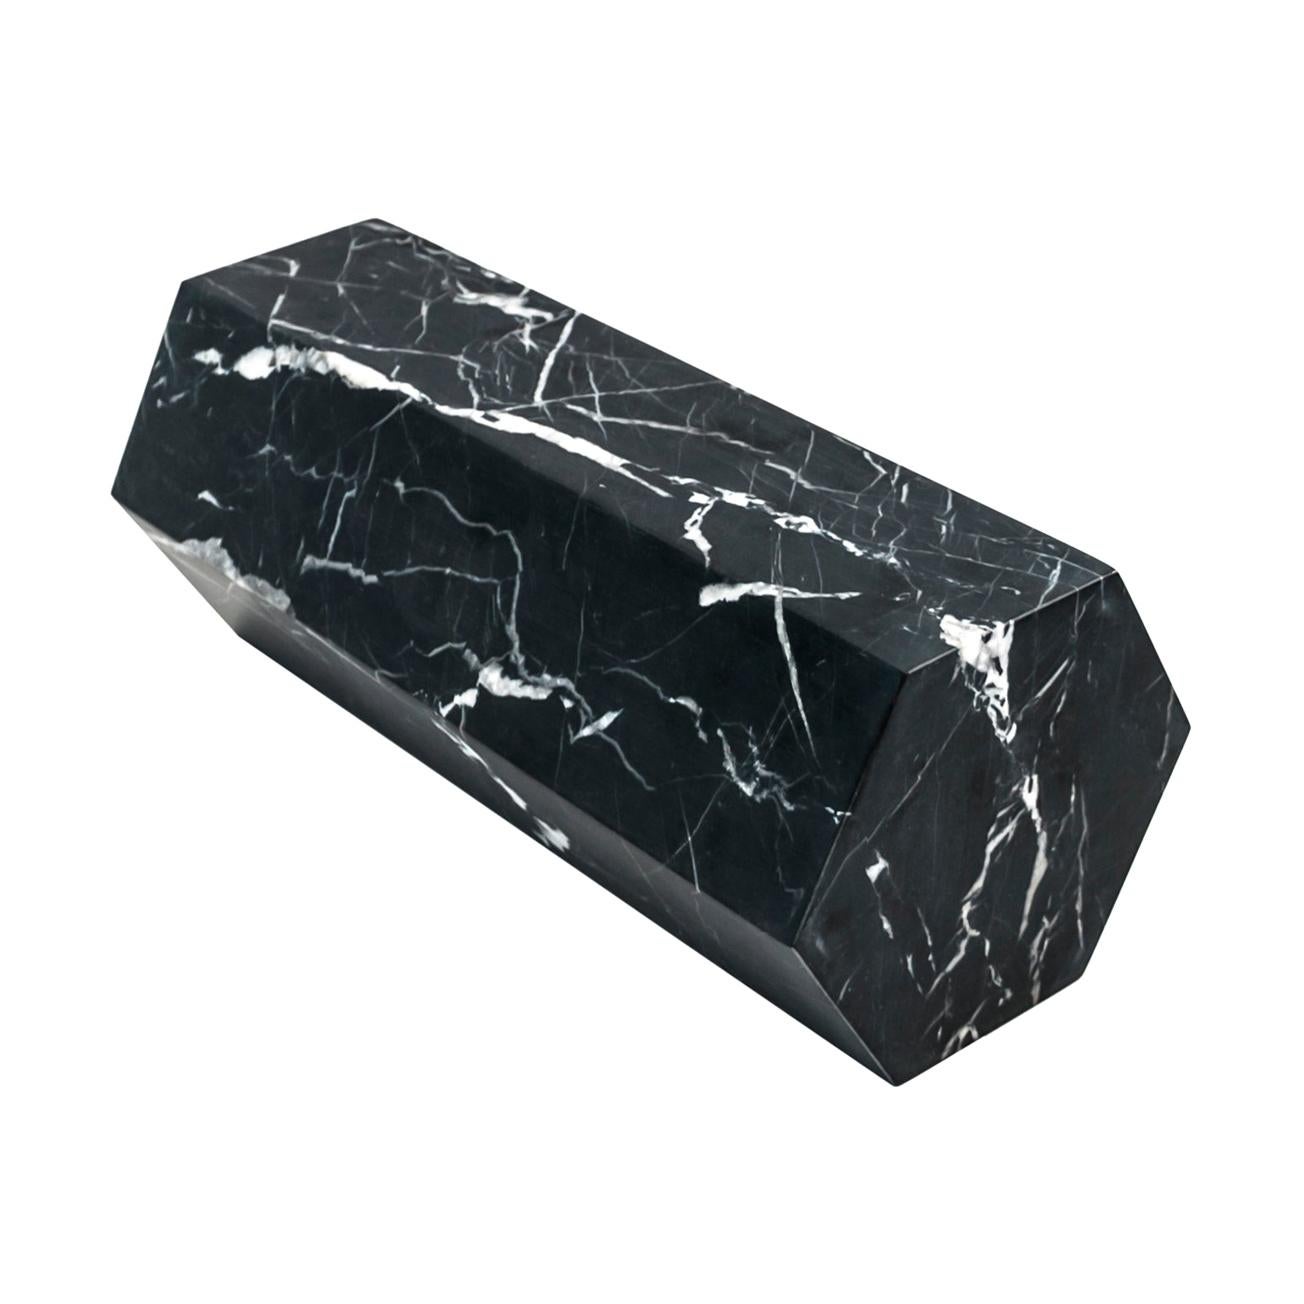 Handmade Big Decorative Prism / Bookend in Satin Black Marquina Marble